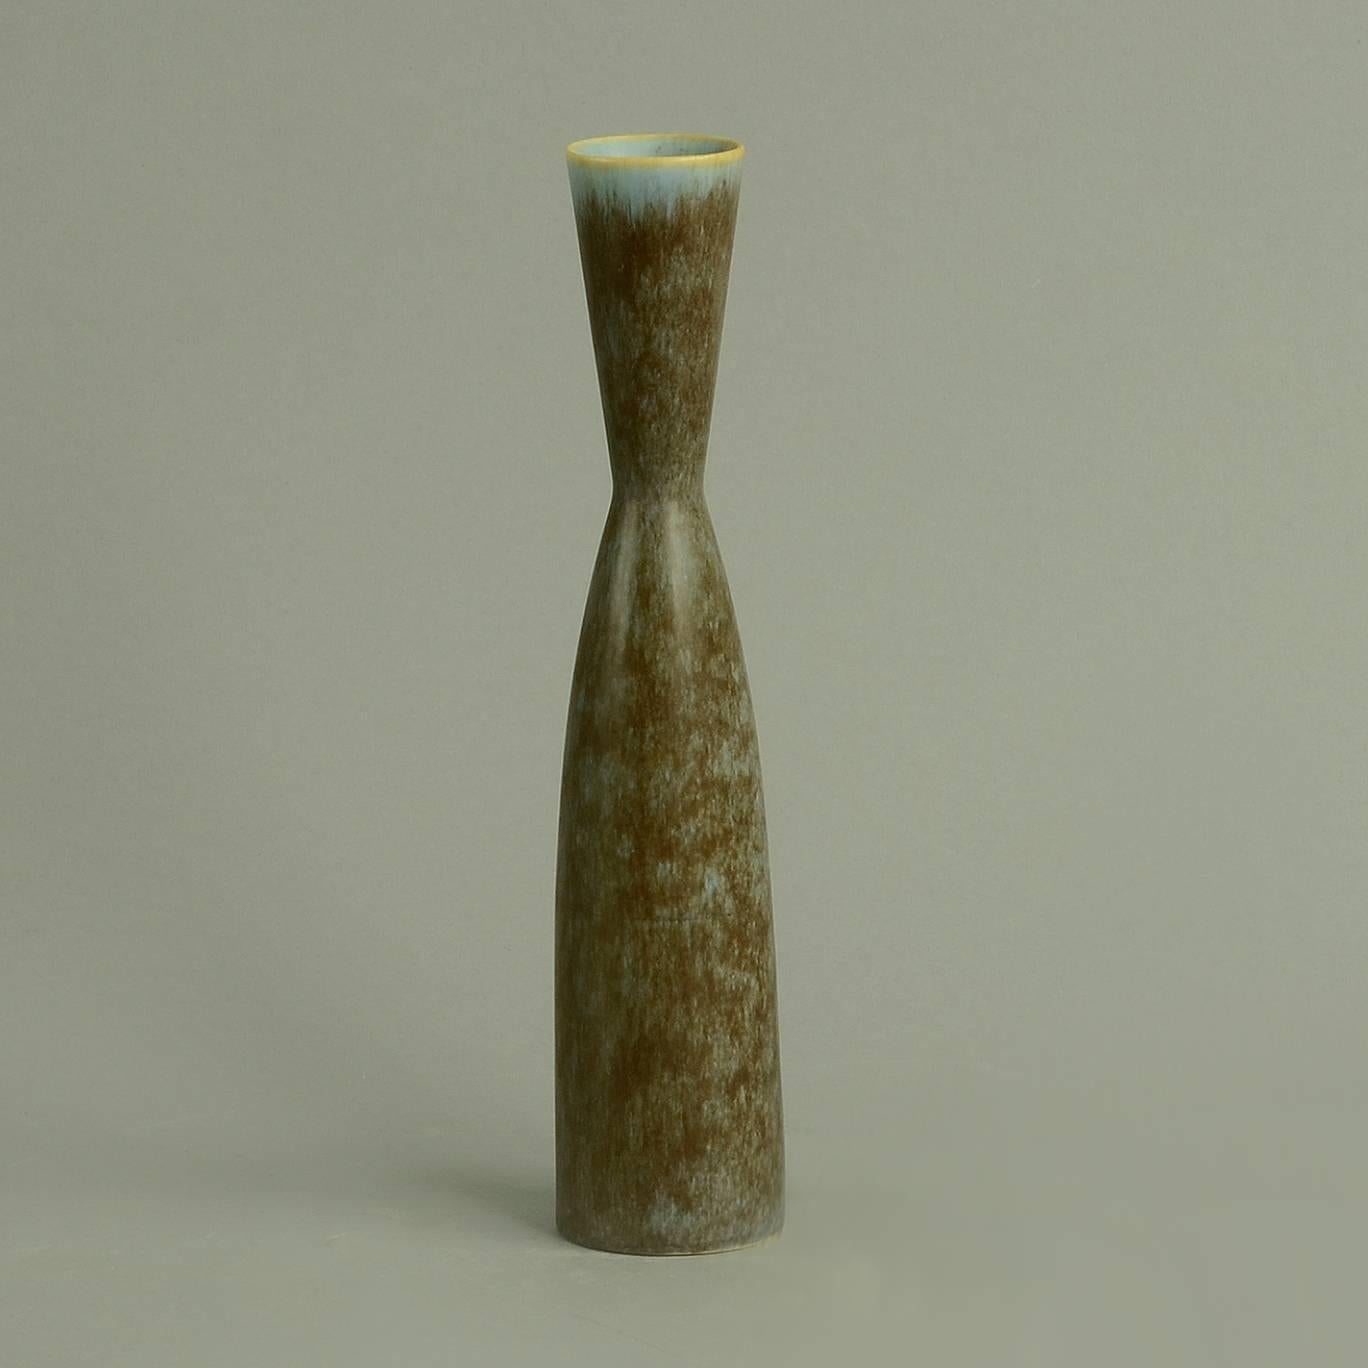 Gunnar Nylund and Carl Harry Stålhane for Rorstrand, Sweden 

1. Stoneware vase with blue and brown matte haresfur glaze by Carl Harry Stalhane, 1950s-1960s.
Measures: Height 8 3/4" (22.5cm), width 1 3/4" (4.5cm) 
Incised "R (three